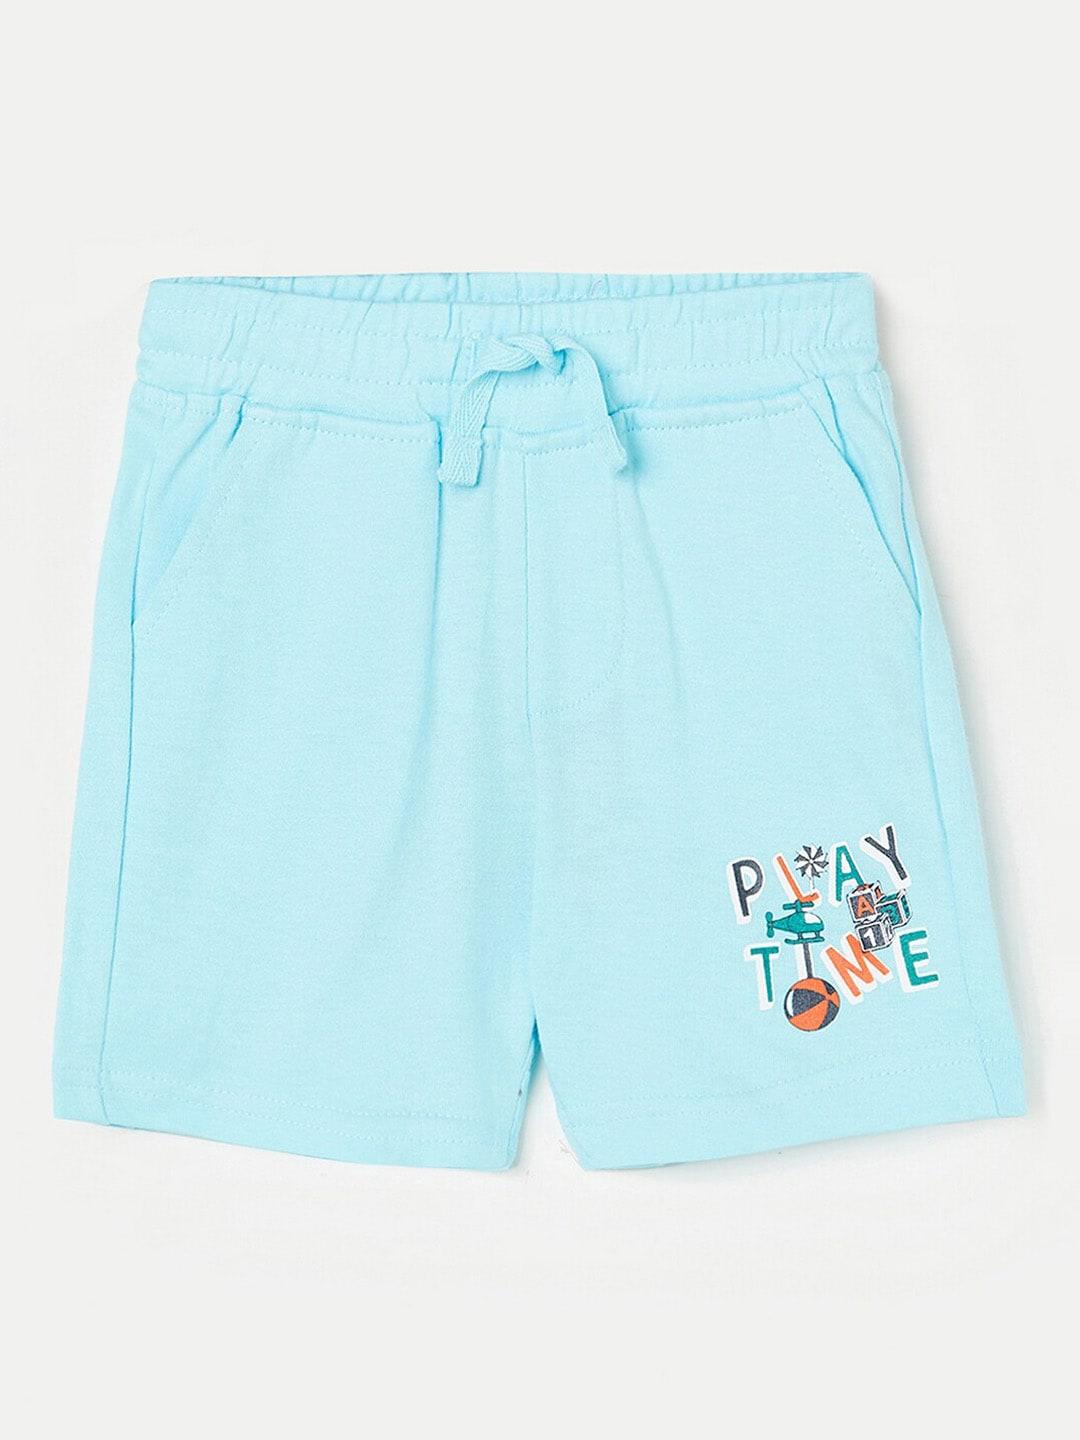 juniors-by-lifestyle-boys-typography-printed-slim-fit-pure-cotton-shorts